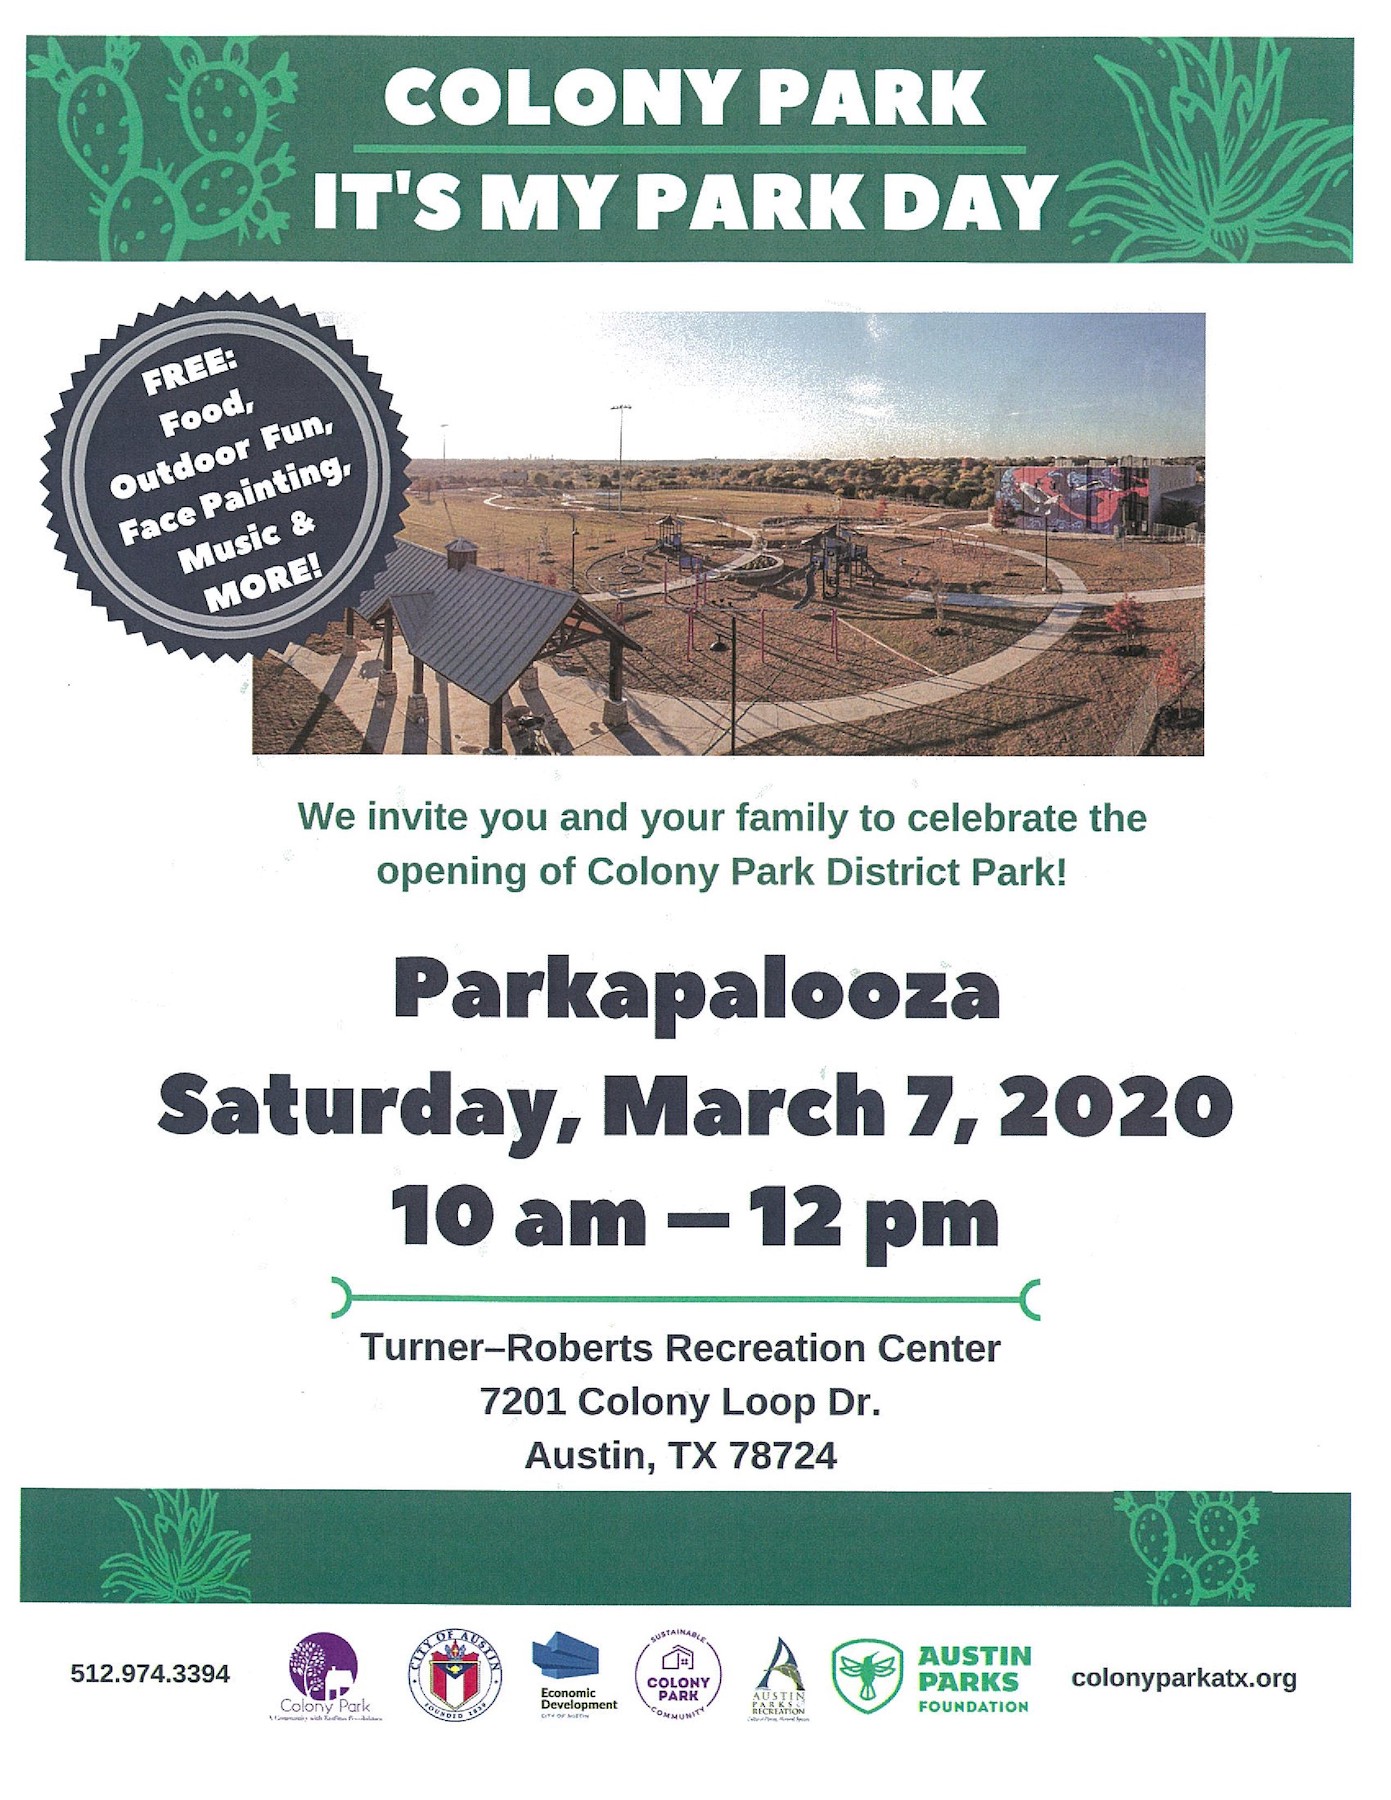 Join us March 7, 10am-12am for Parkapalooza at Colony Park